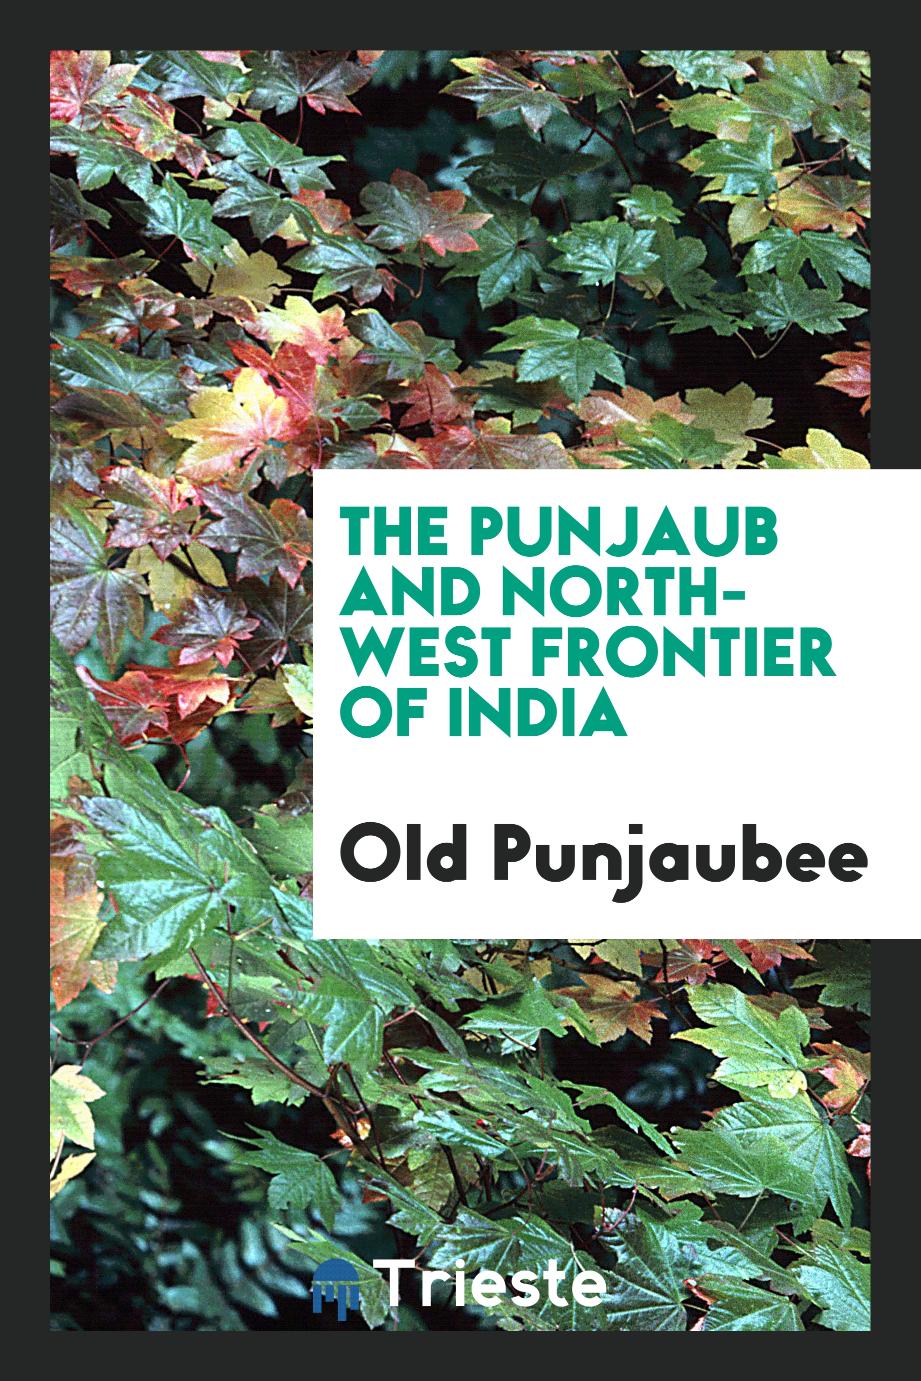 The Punjaub and North-West frontier of India